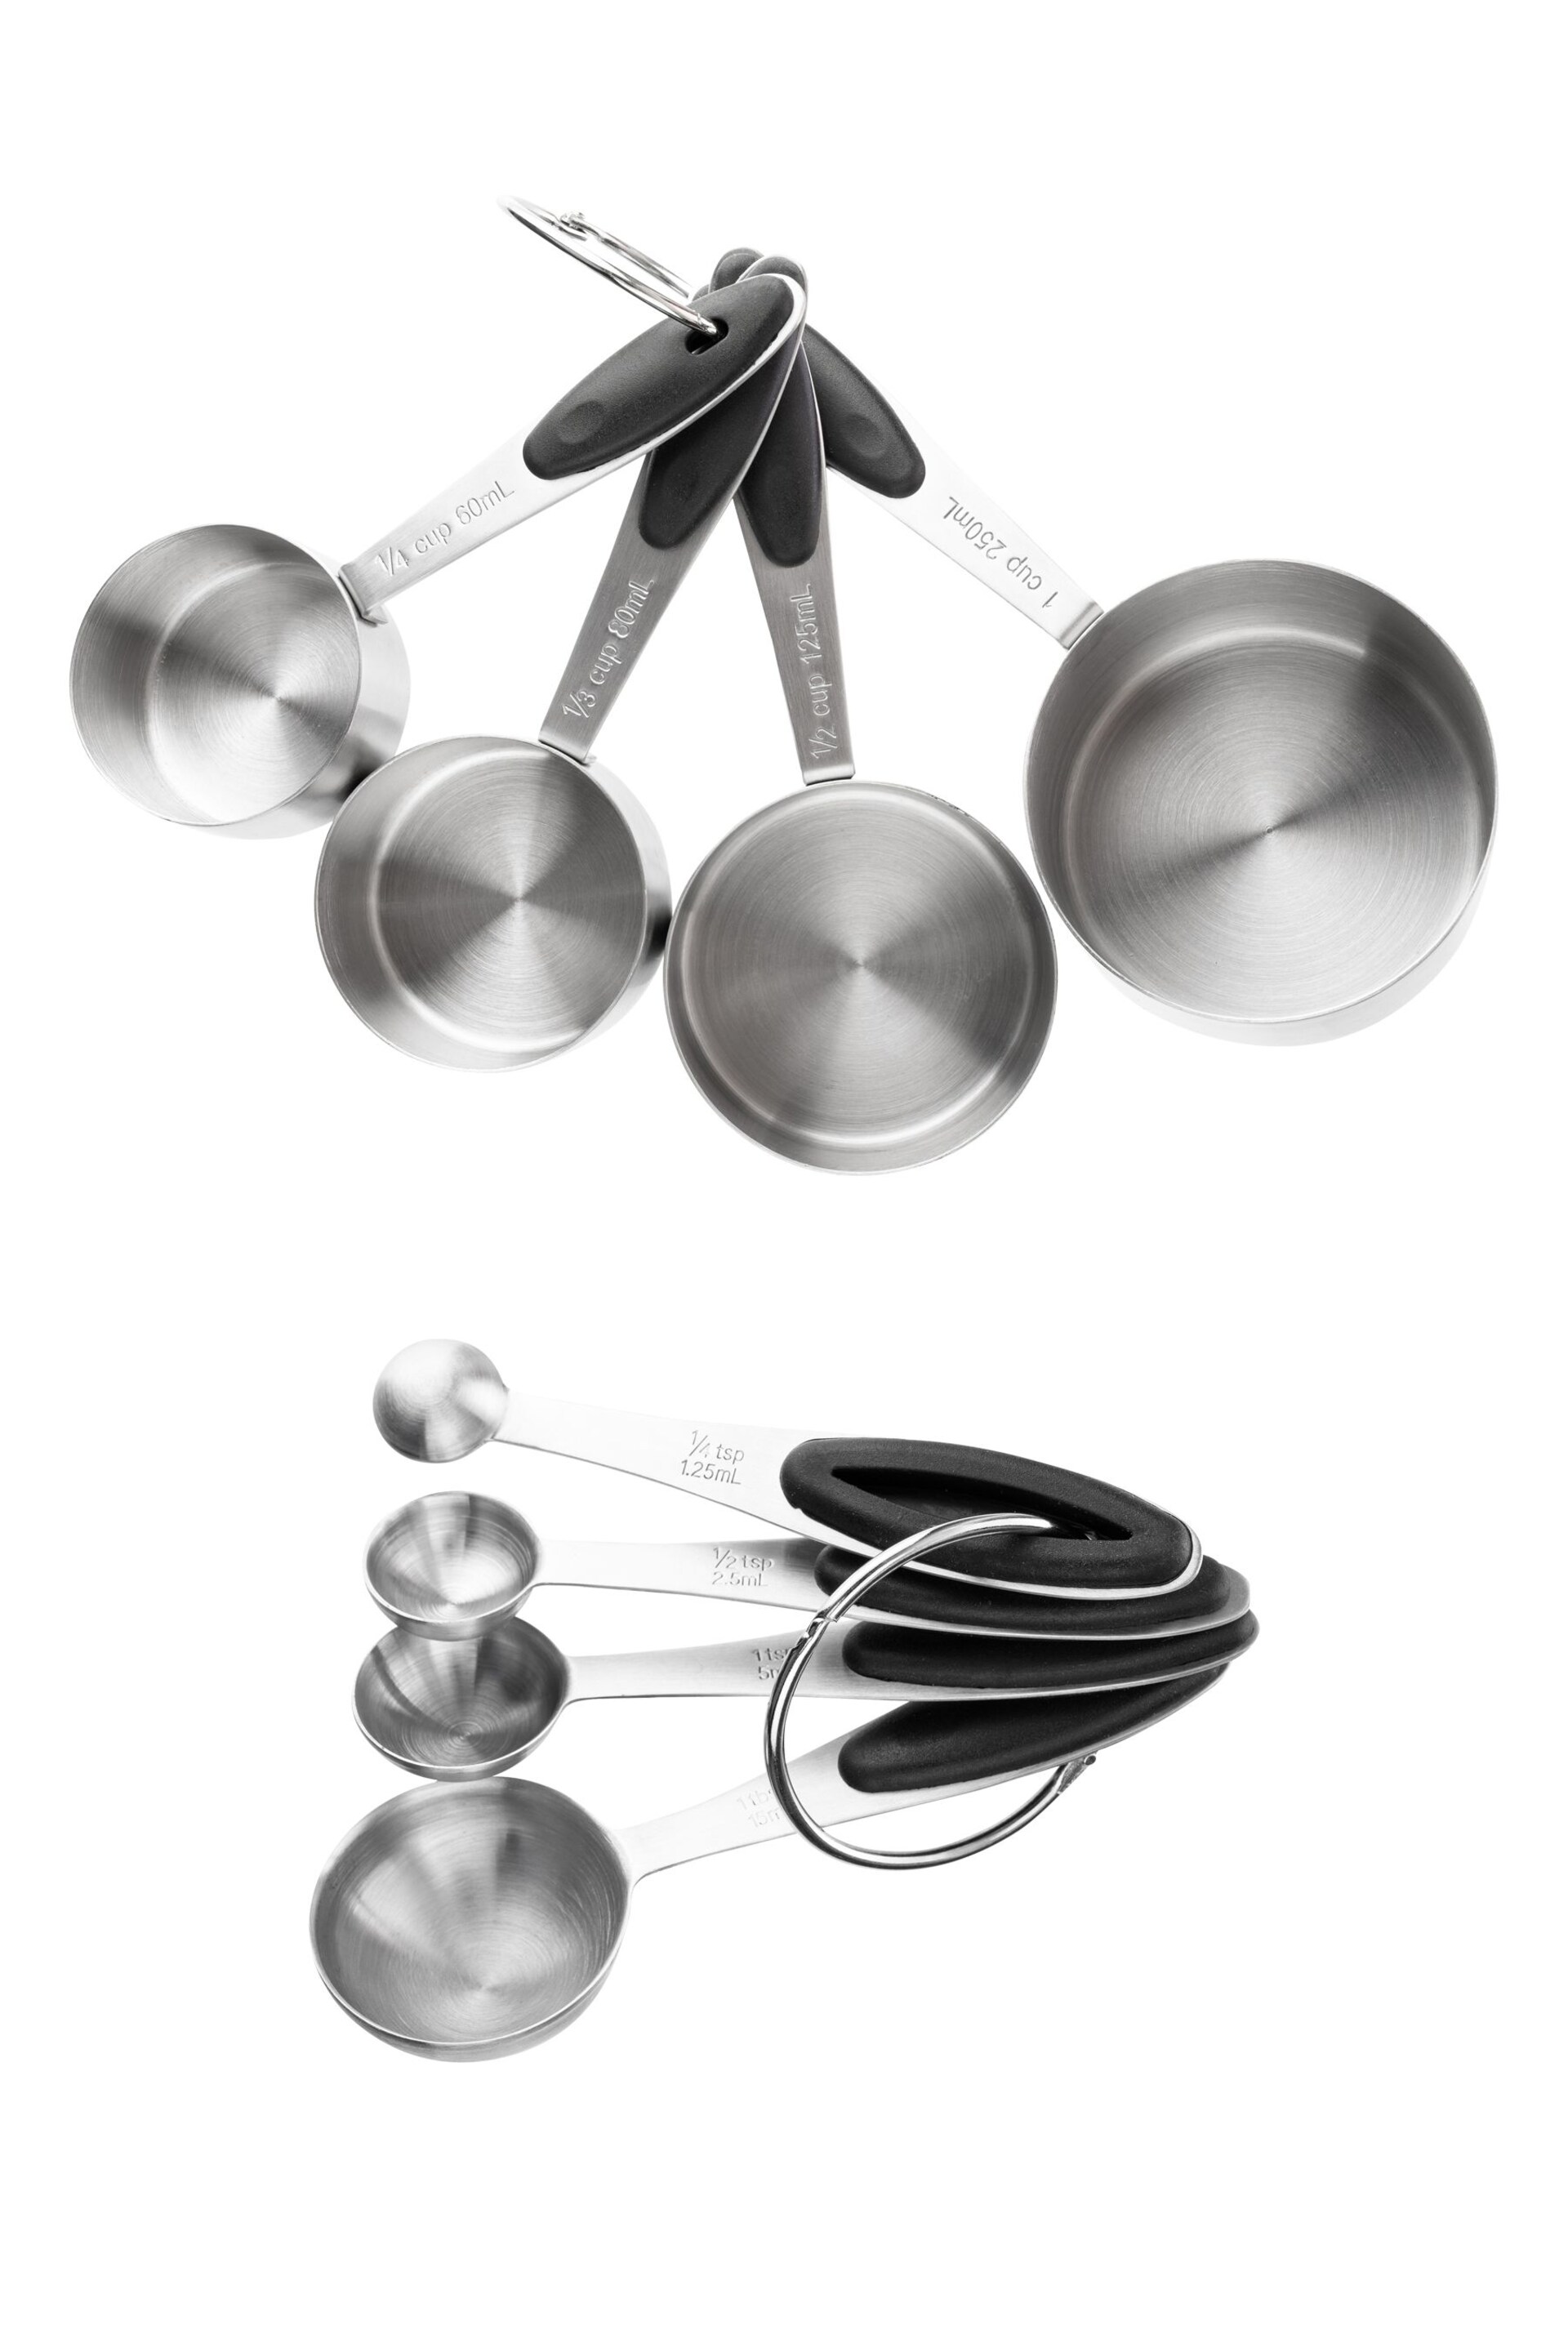 Fusion Black Measuring Cups/Spoons Set - Image 2 of 3